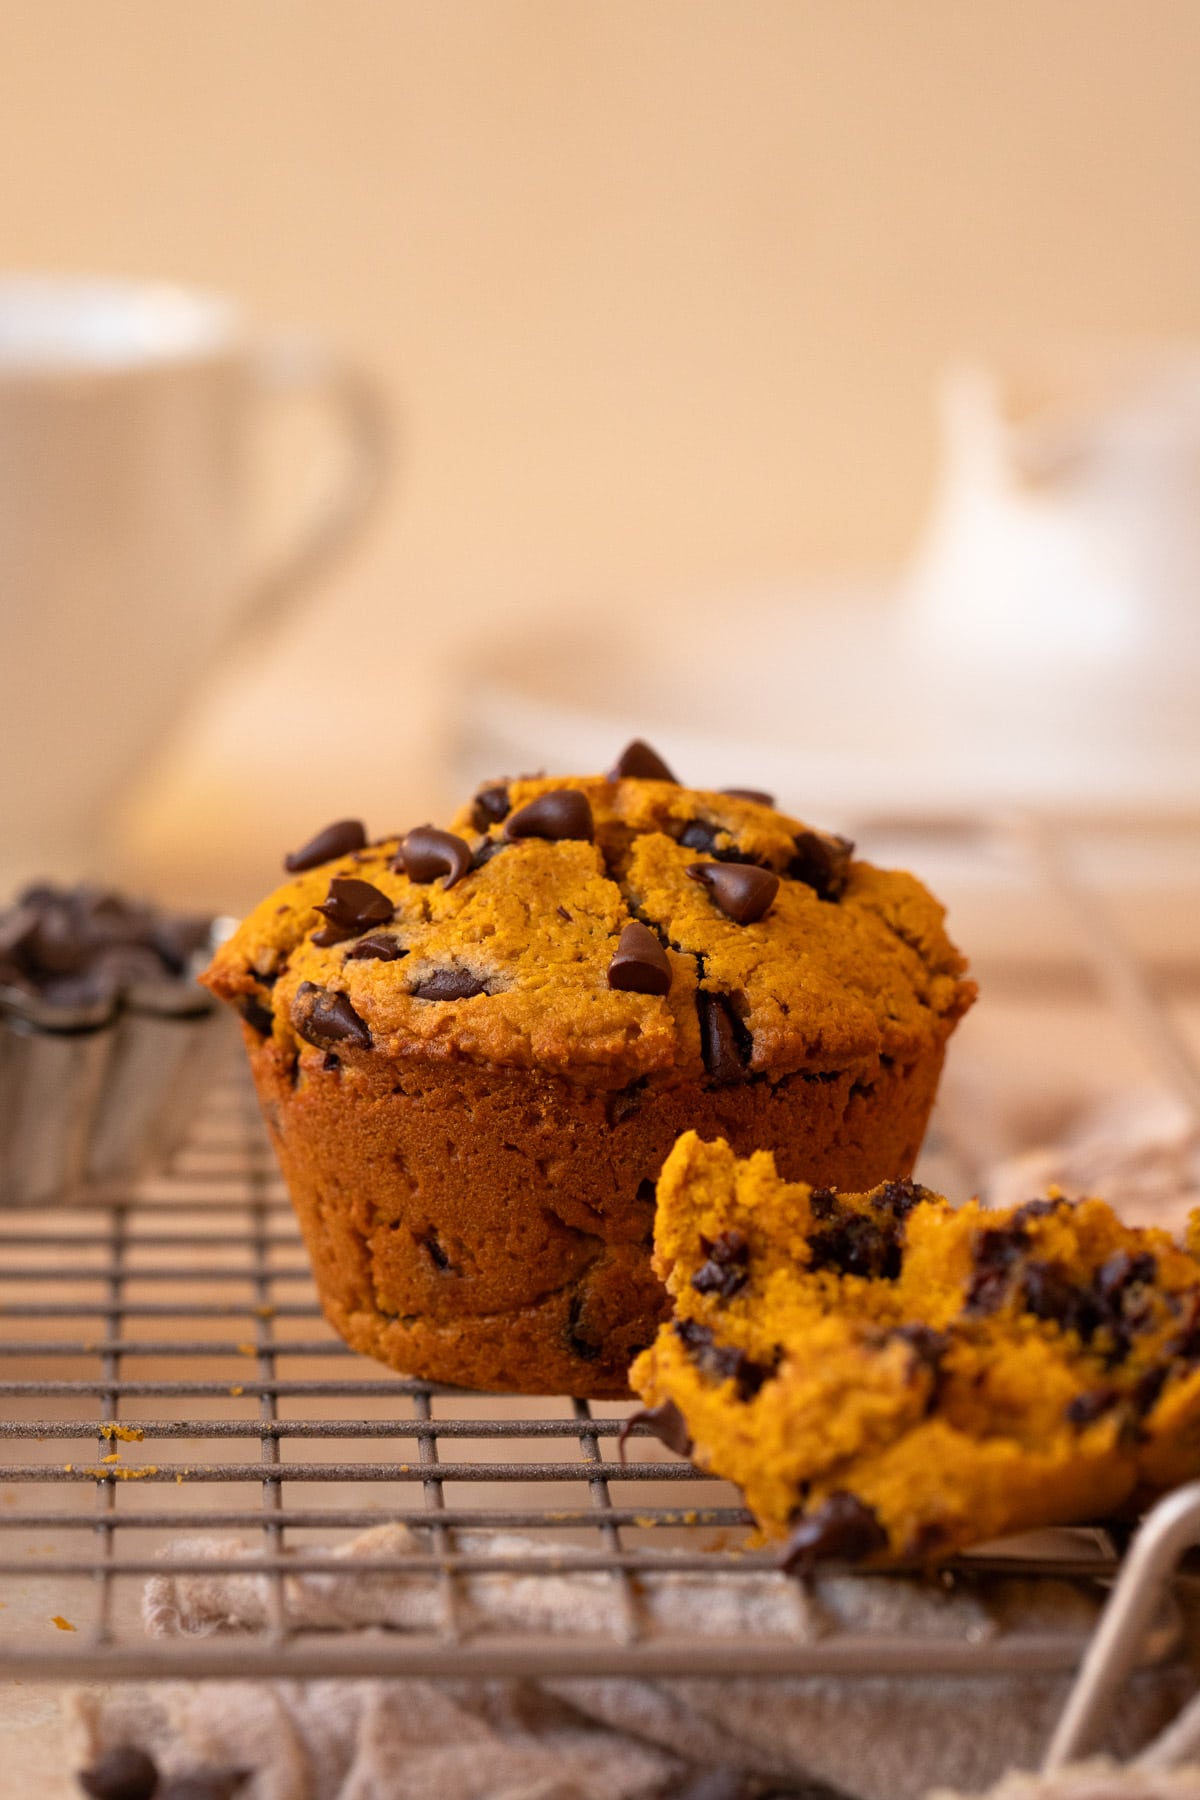 Close up of a muffin on a wire cooling rack, with a portion of a third muffin in the foreground showing the crumb.